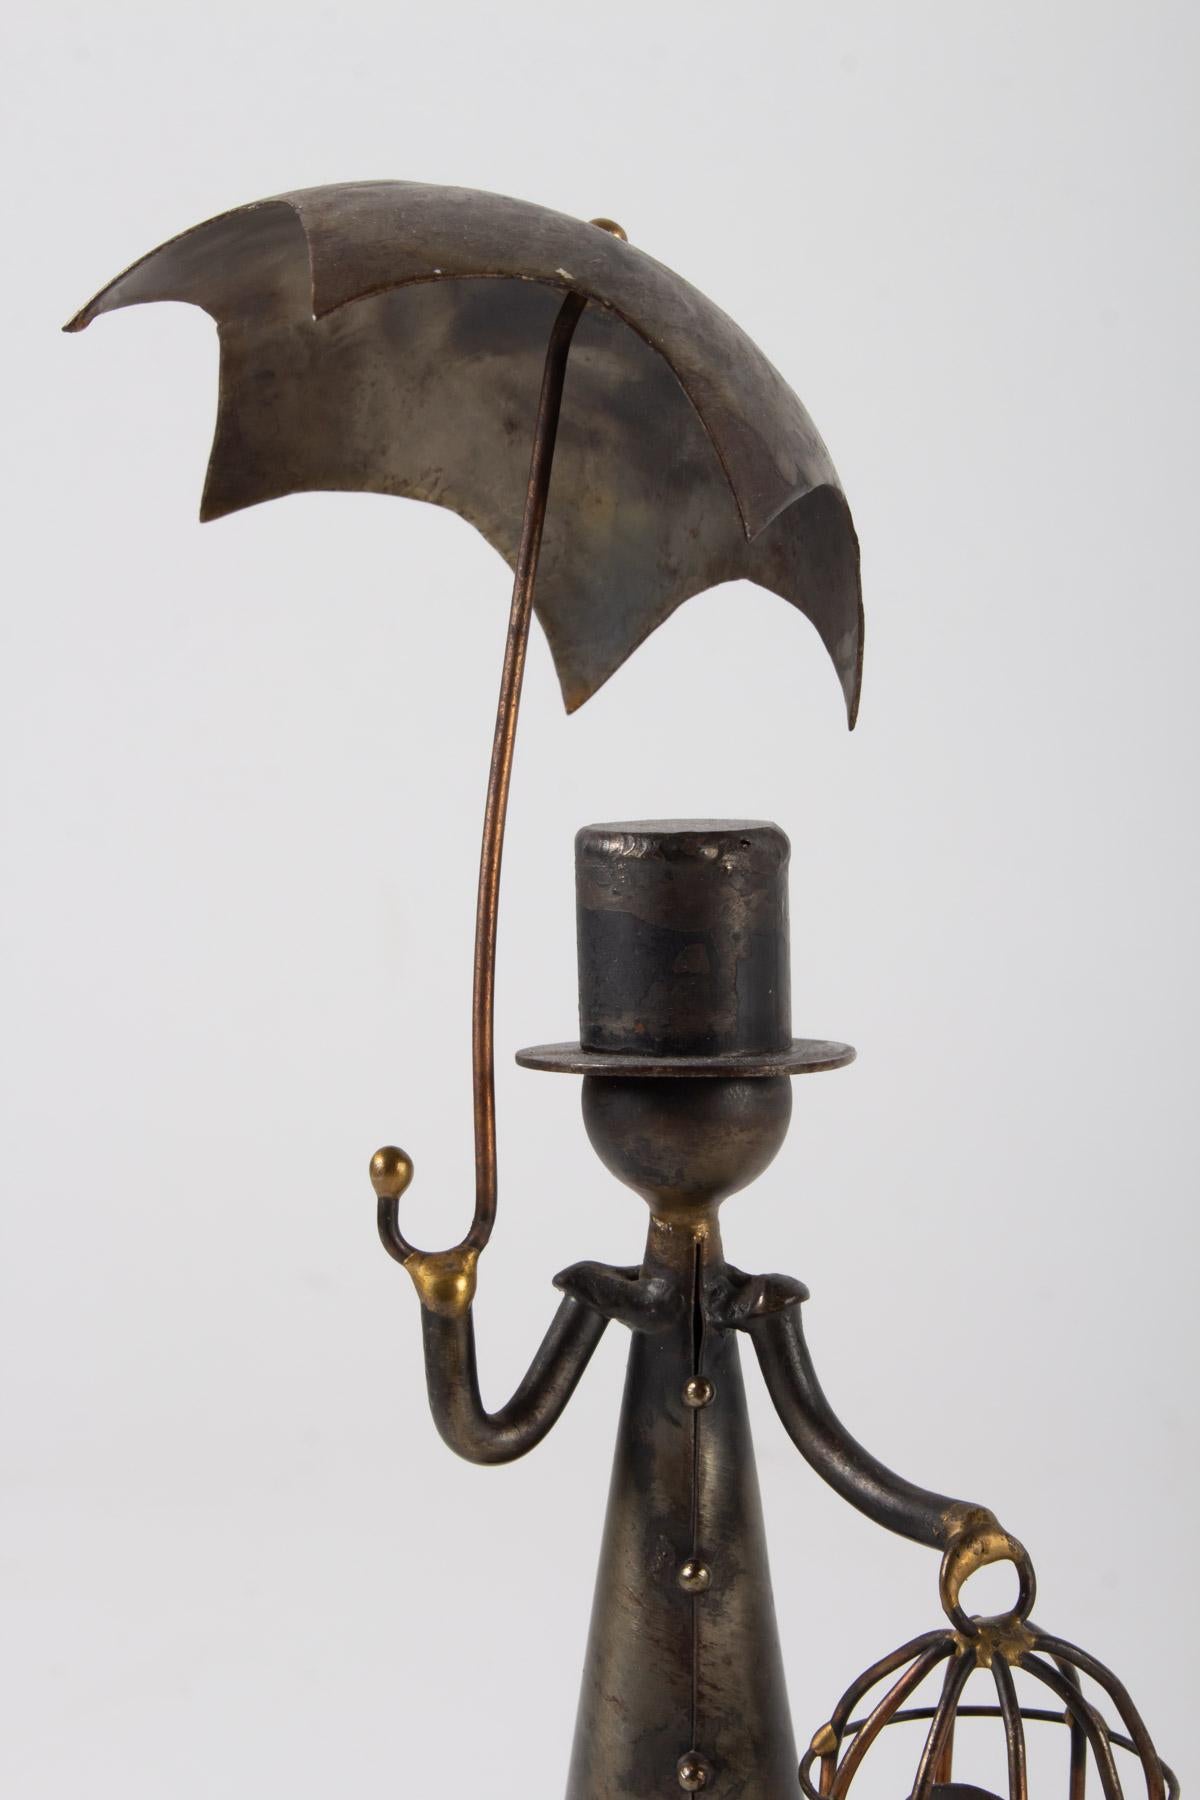 20th Century Sculpture, Man with Umbrella and Couple in Thermometer, Belle Epoque, 1900-1920